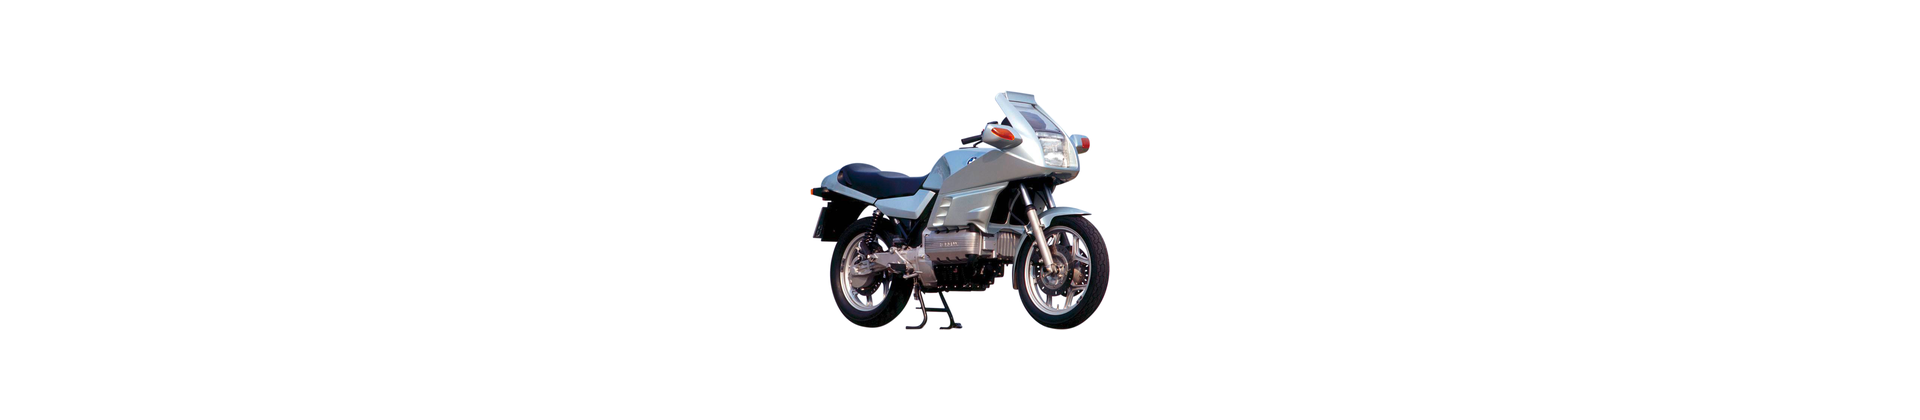 K100RS 1983-1989